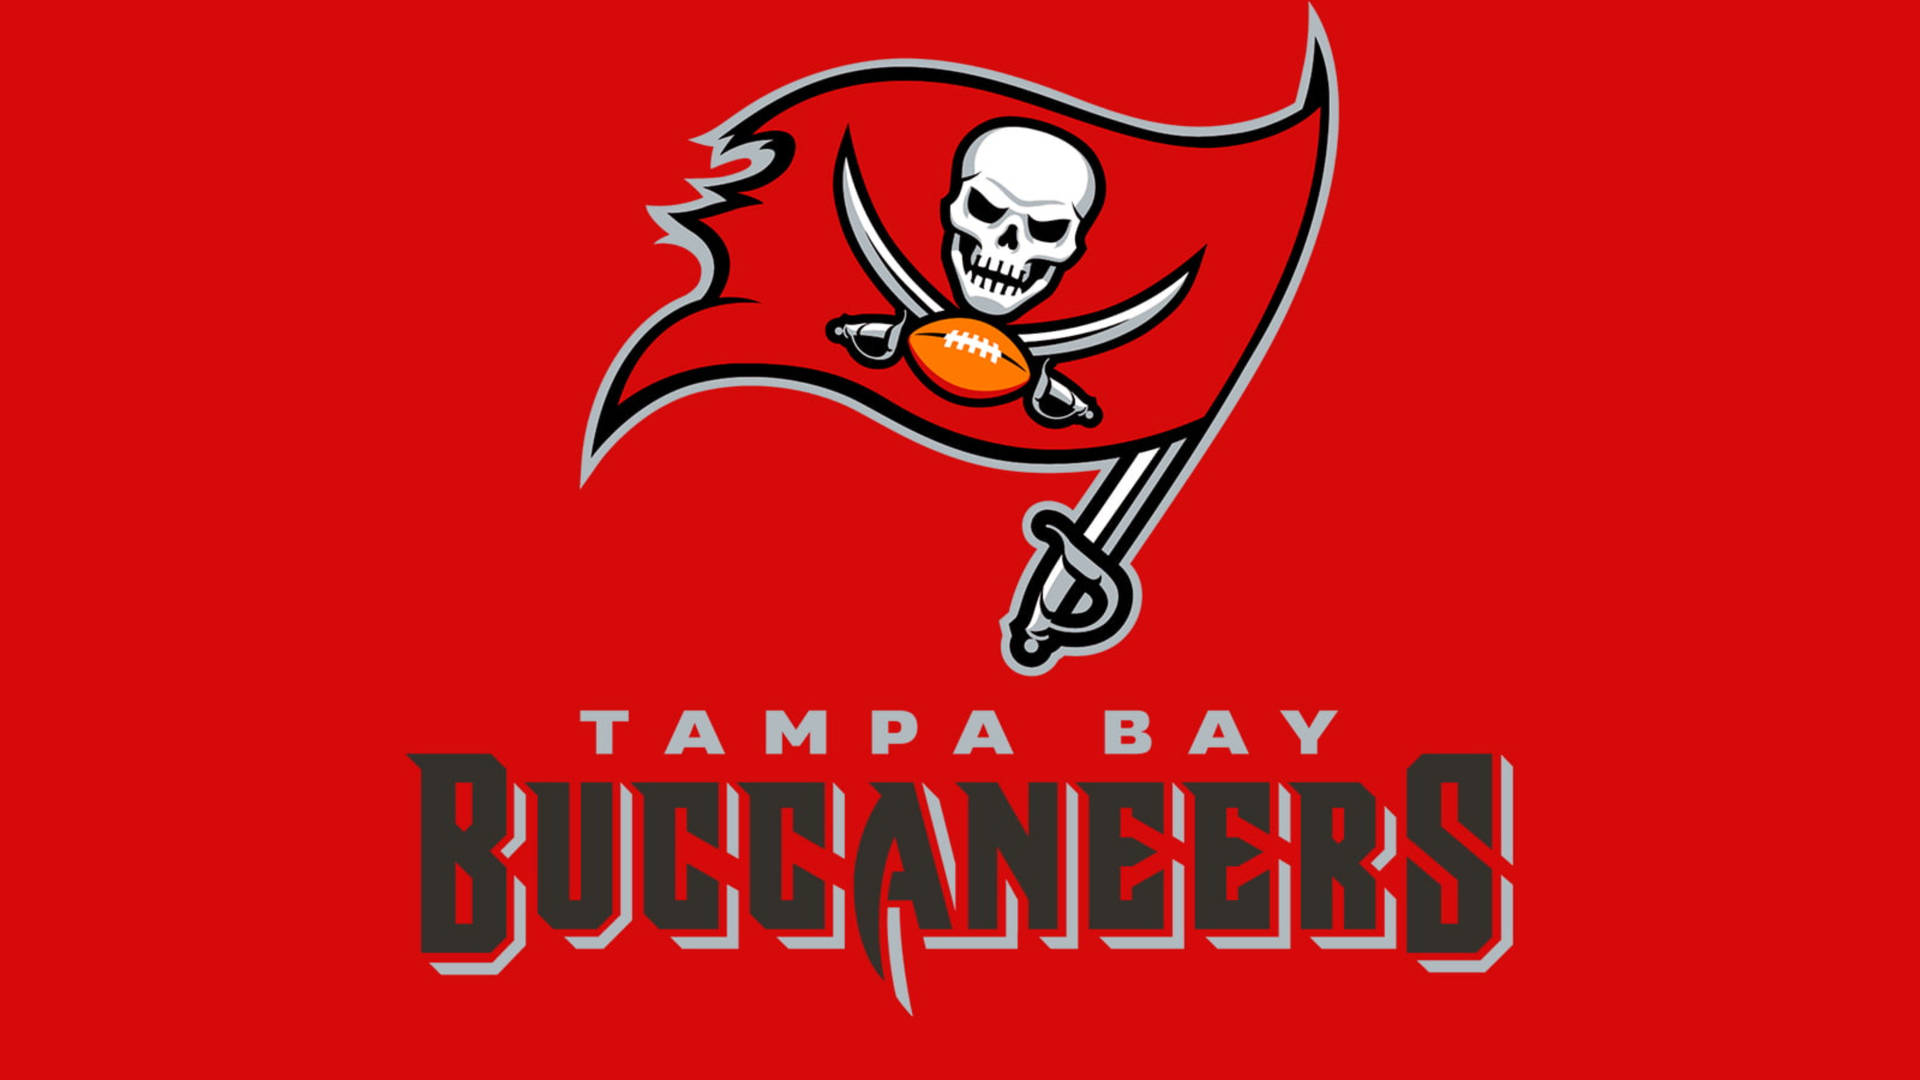 Tampa Bay Buccaneers Name And Logo